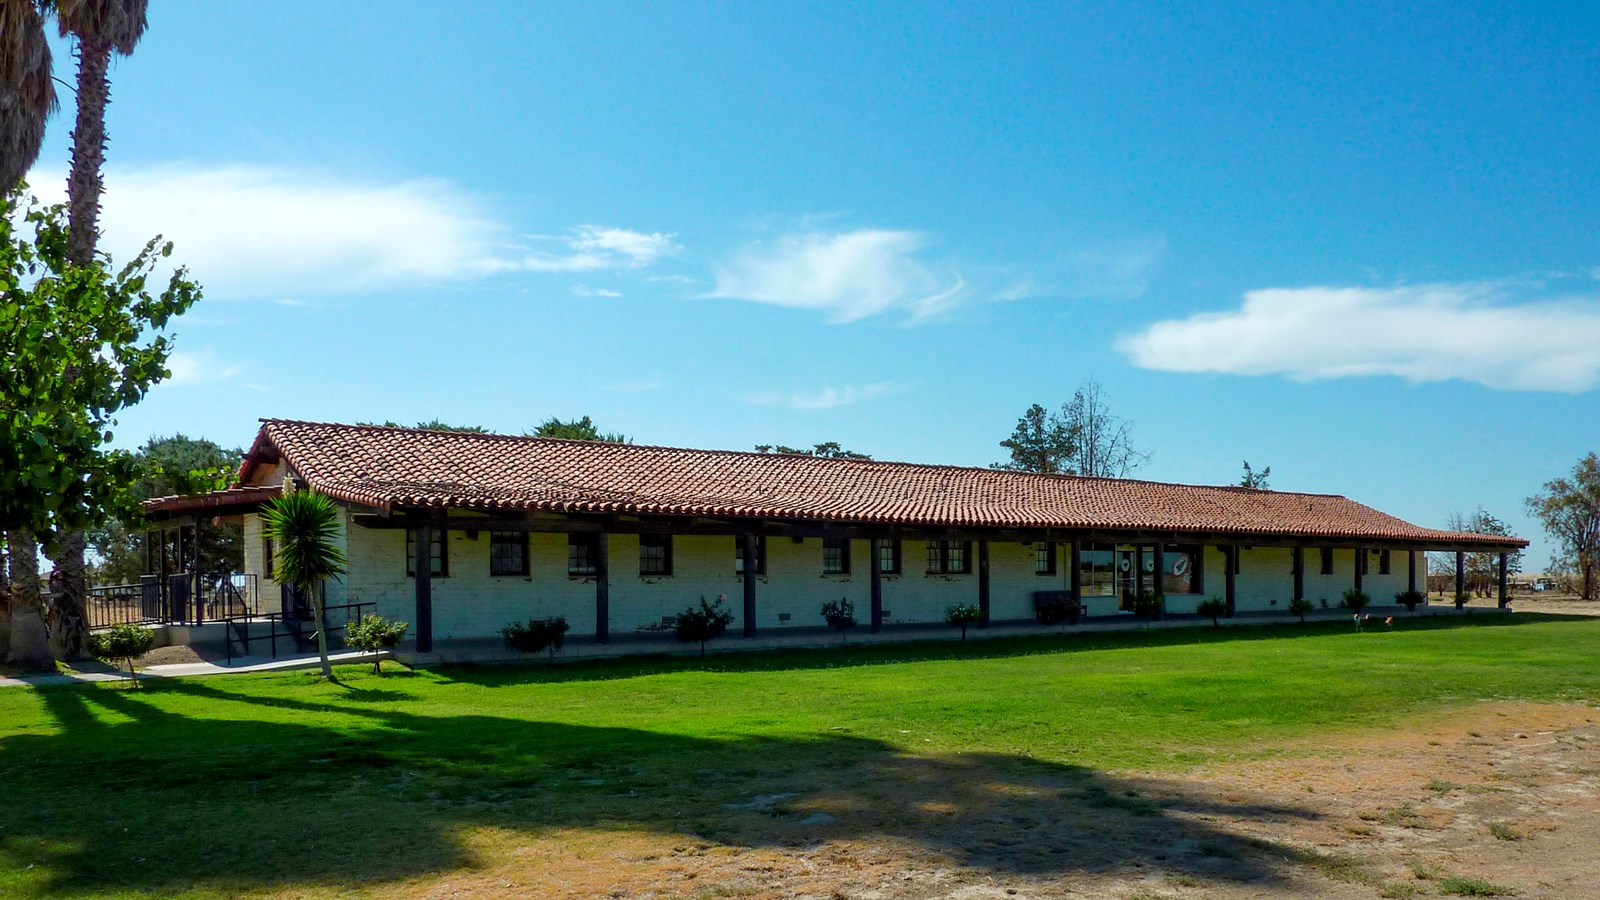 A long Spanish mission style house in an open space.